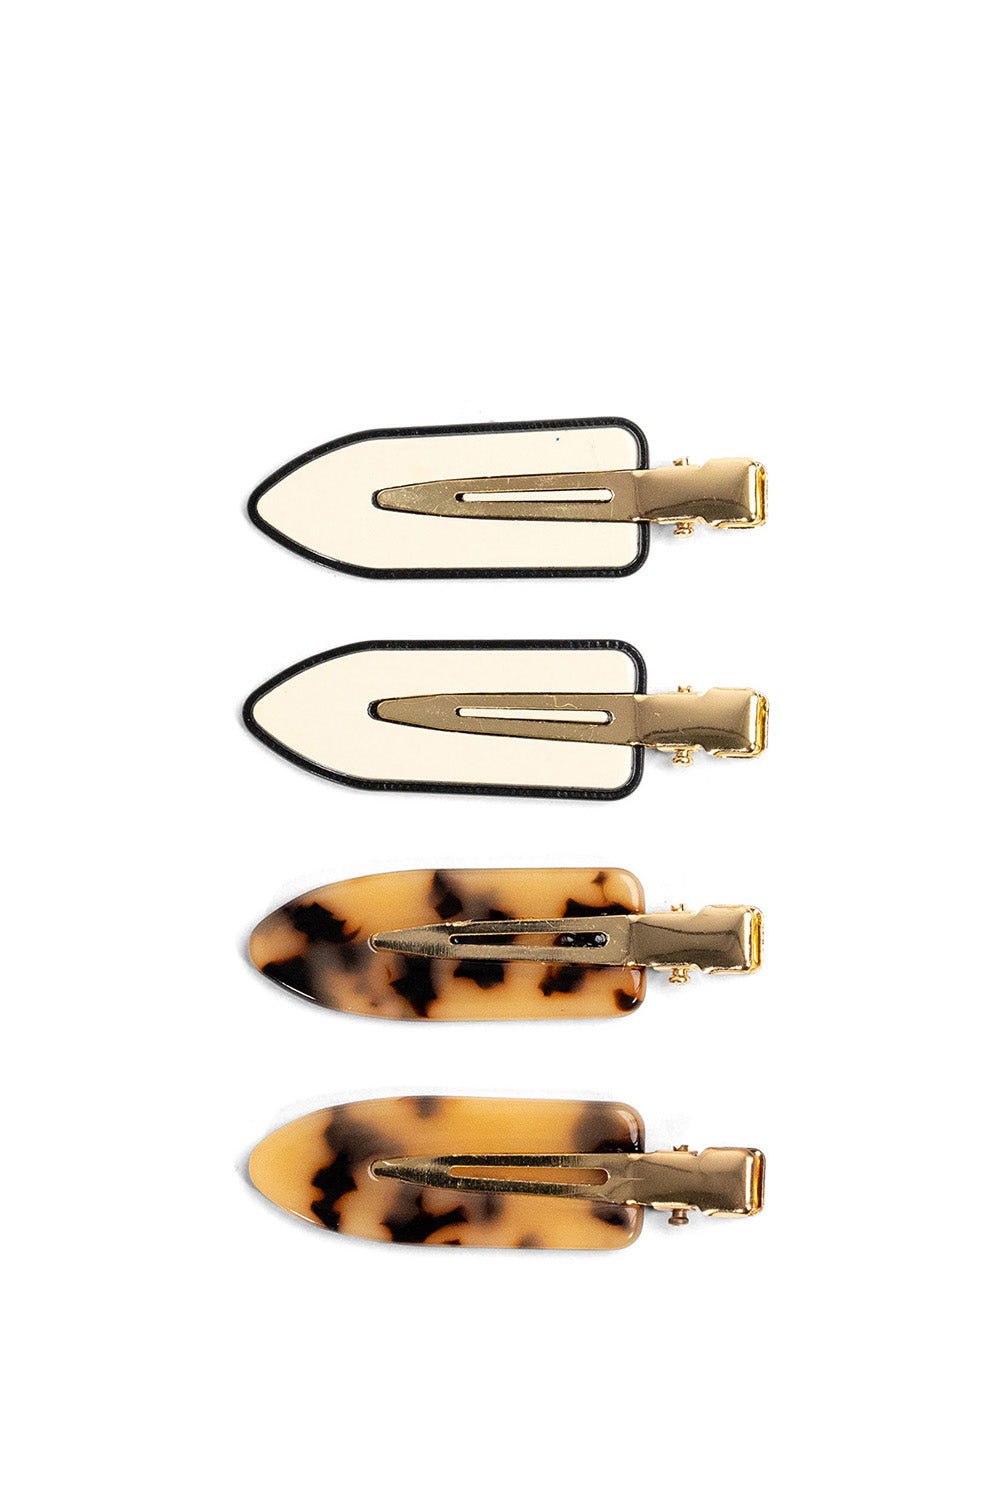 My Accessories London Resin Styling Clips in Brown Tortoiseshell and Cream | Get ready | Hairstyle | Hair Clip | Hair Clips | Hair | Tortoiseshell | Multipack | 